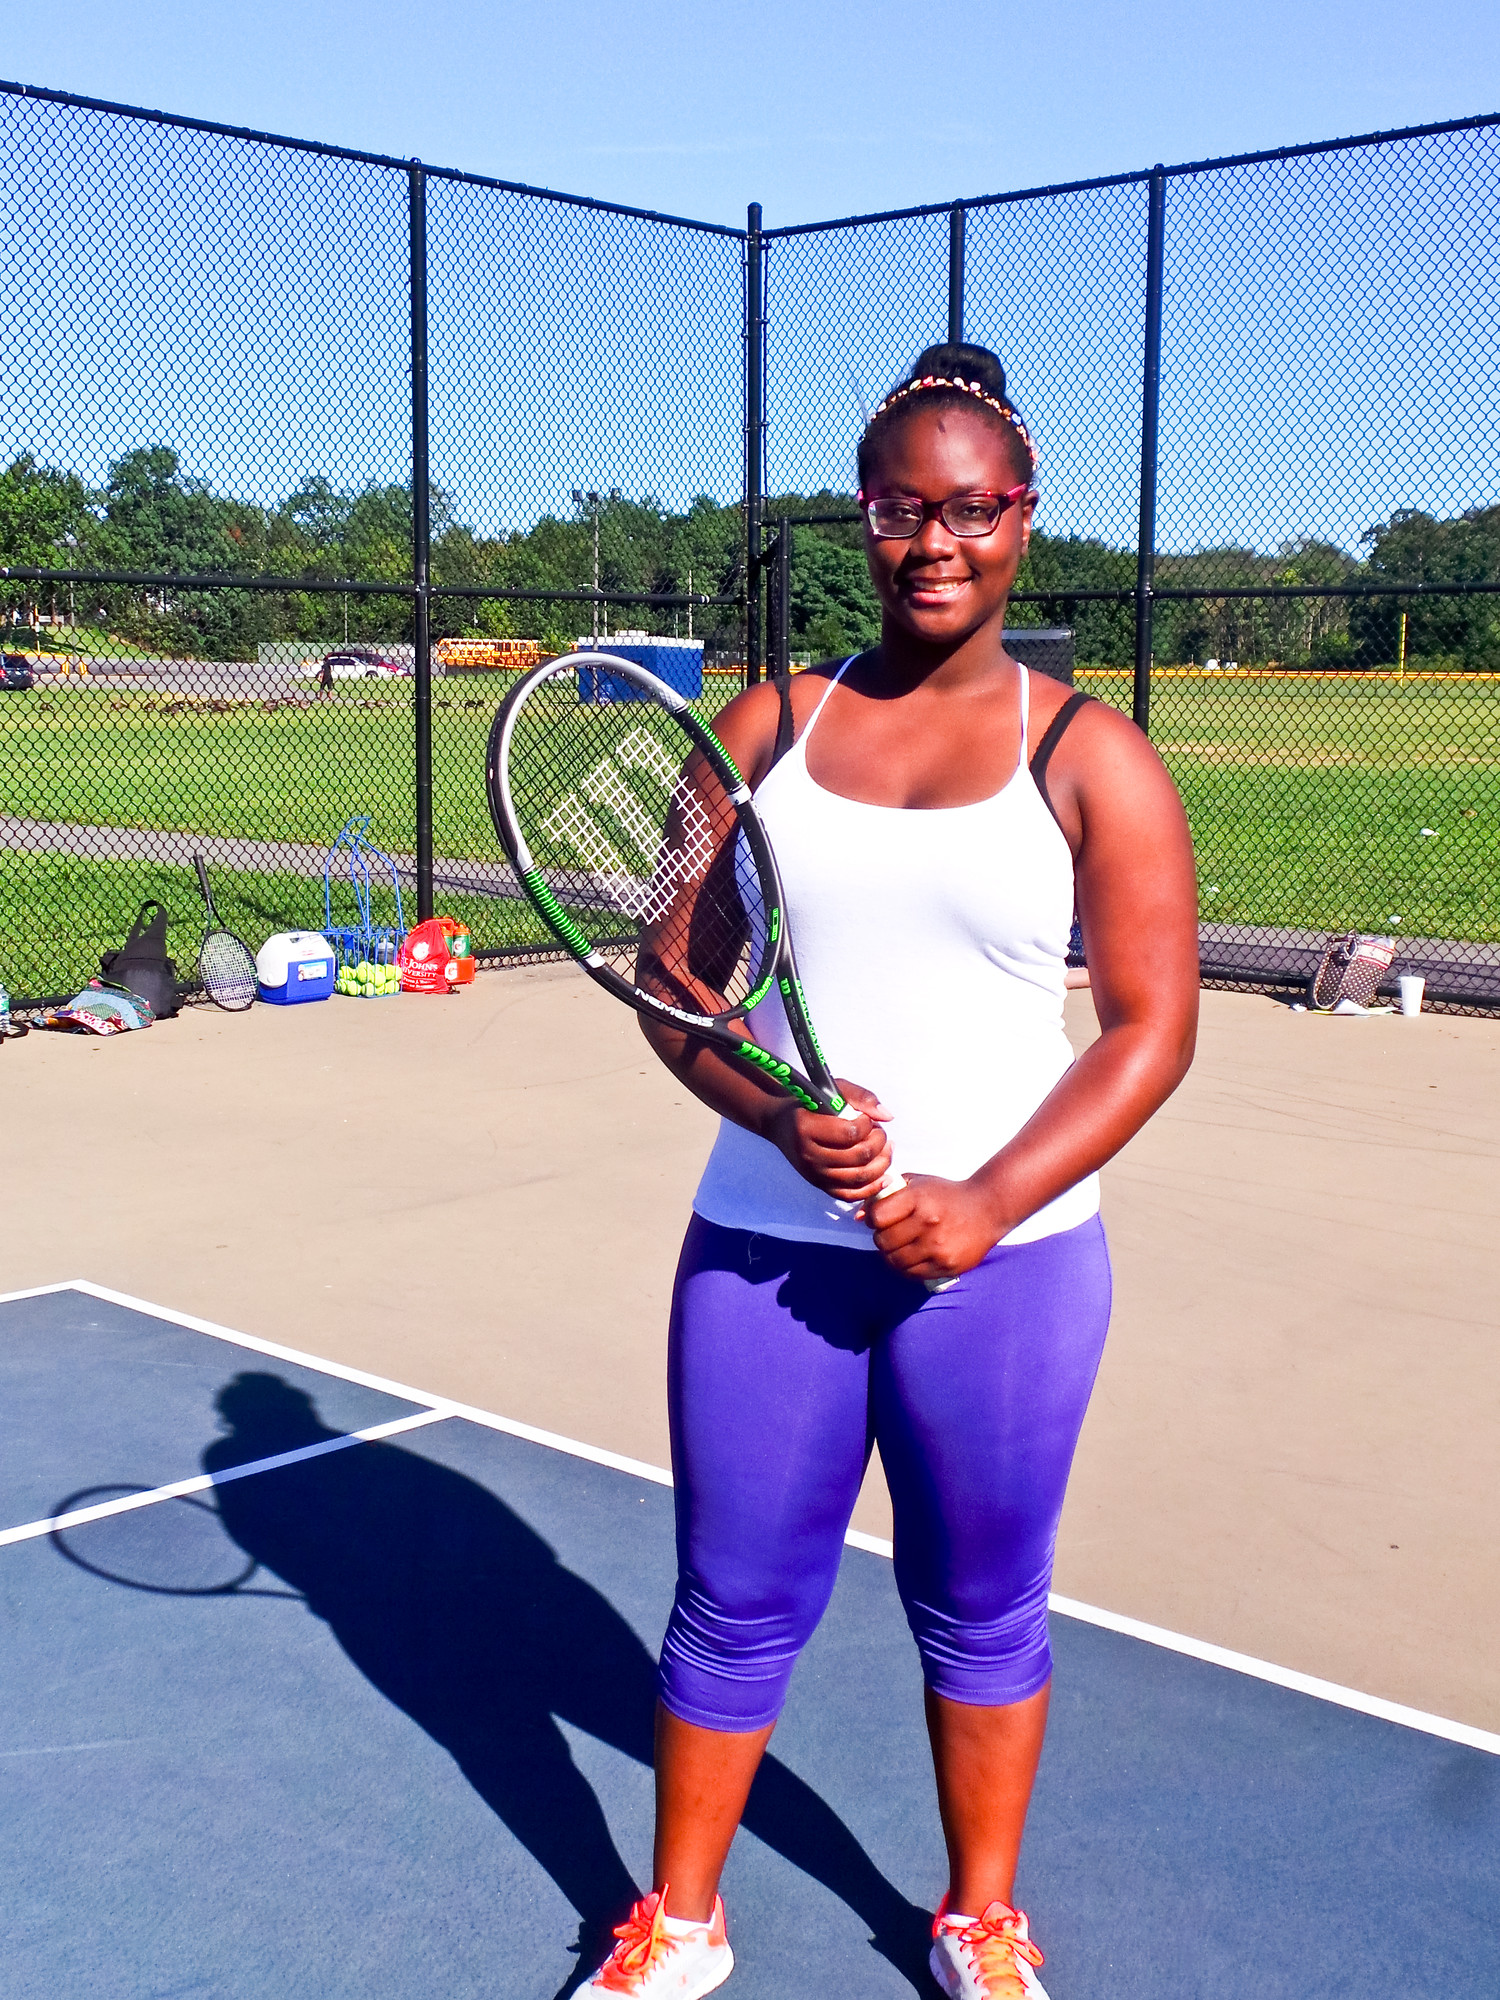 Surieya Thomson, a ninth-grader at Malverne High School, said that Williams inspired her to begin playing tennis.